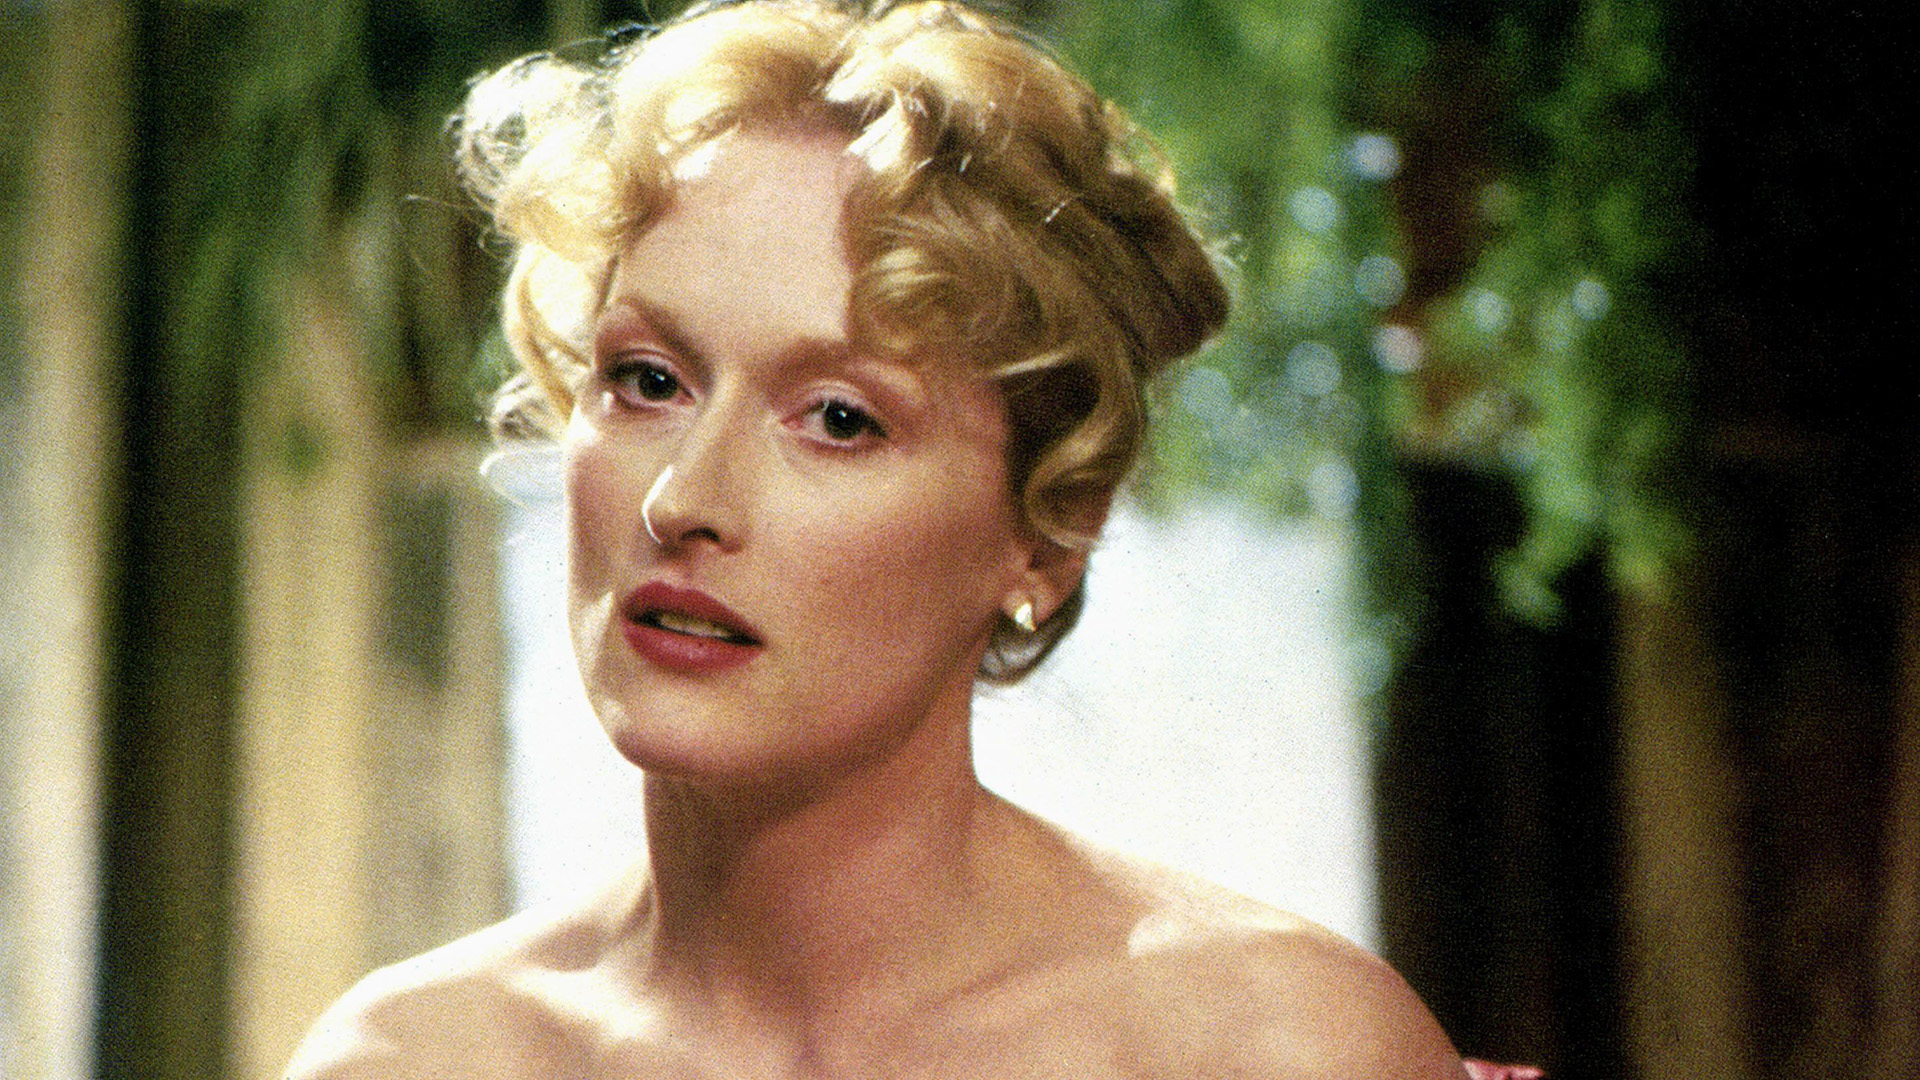 Meryl Streep's Greatest Performances: a Countdown of Her Top 9 Movies